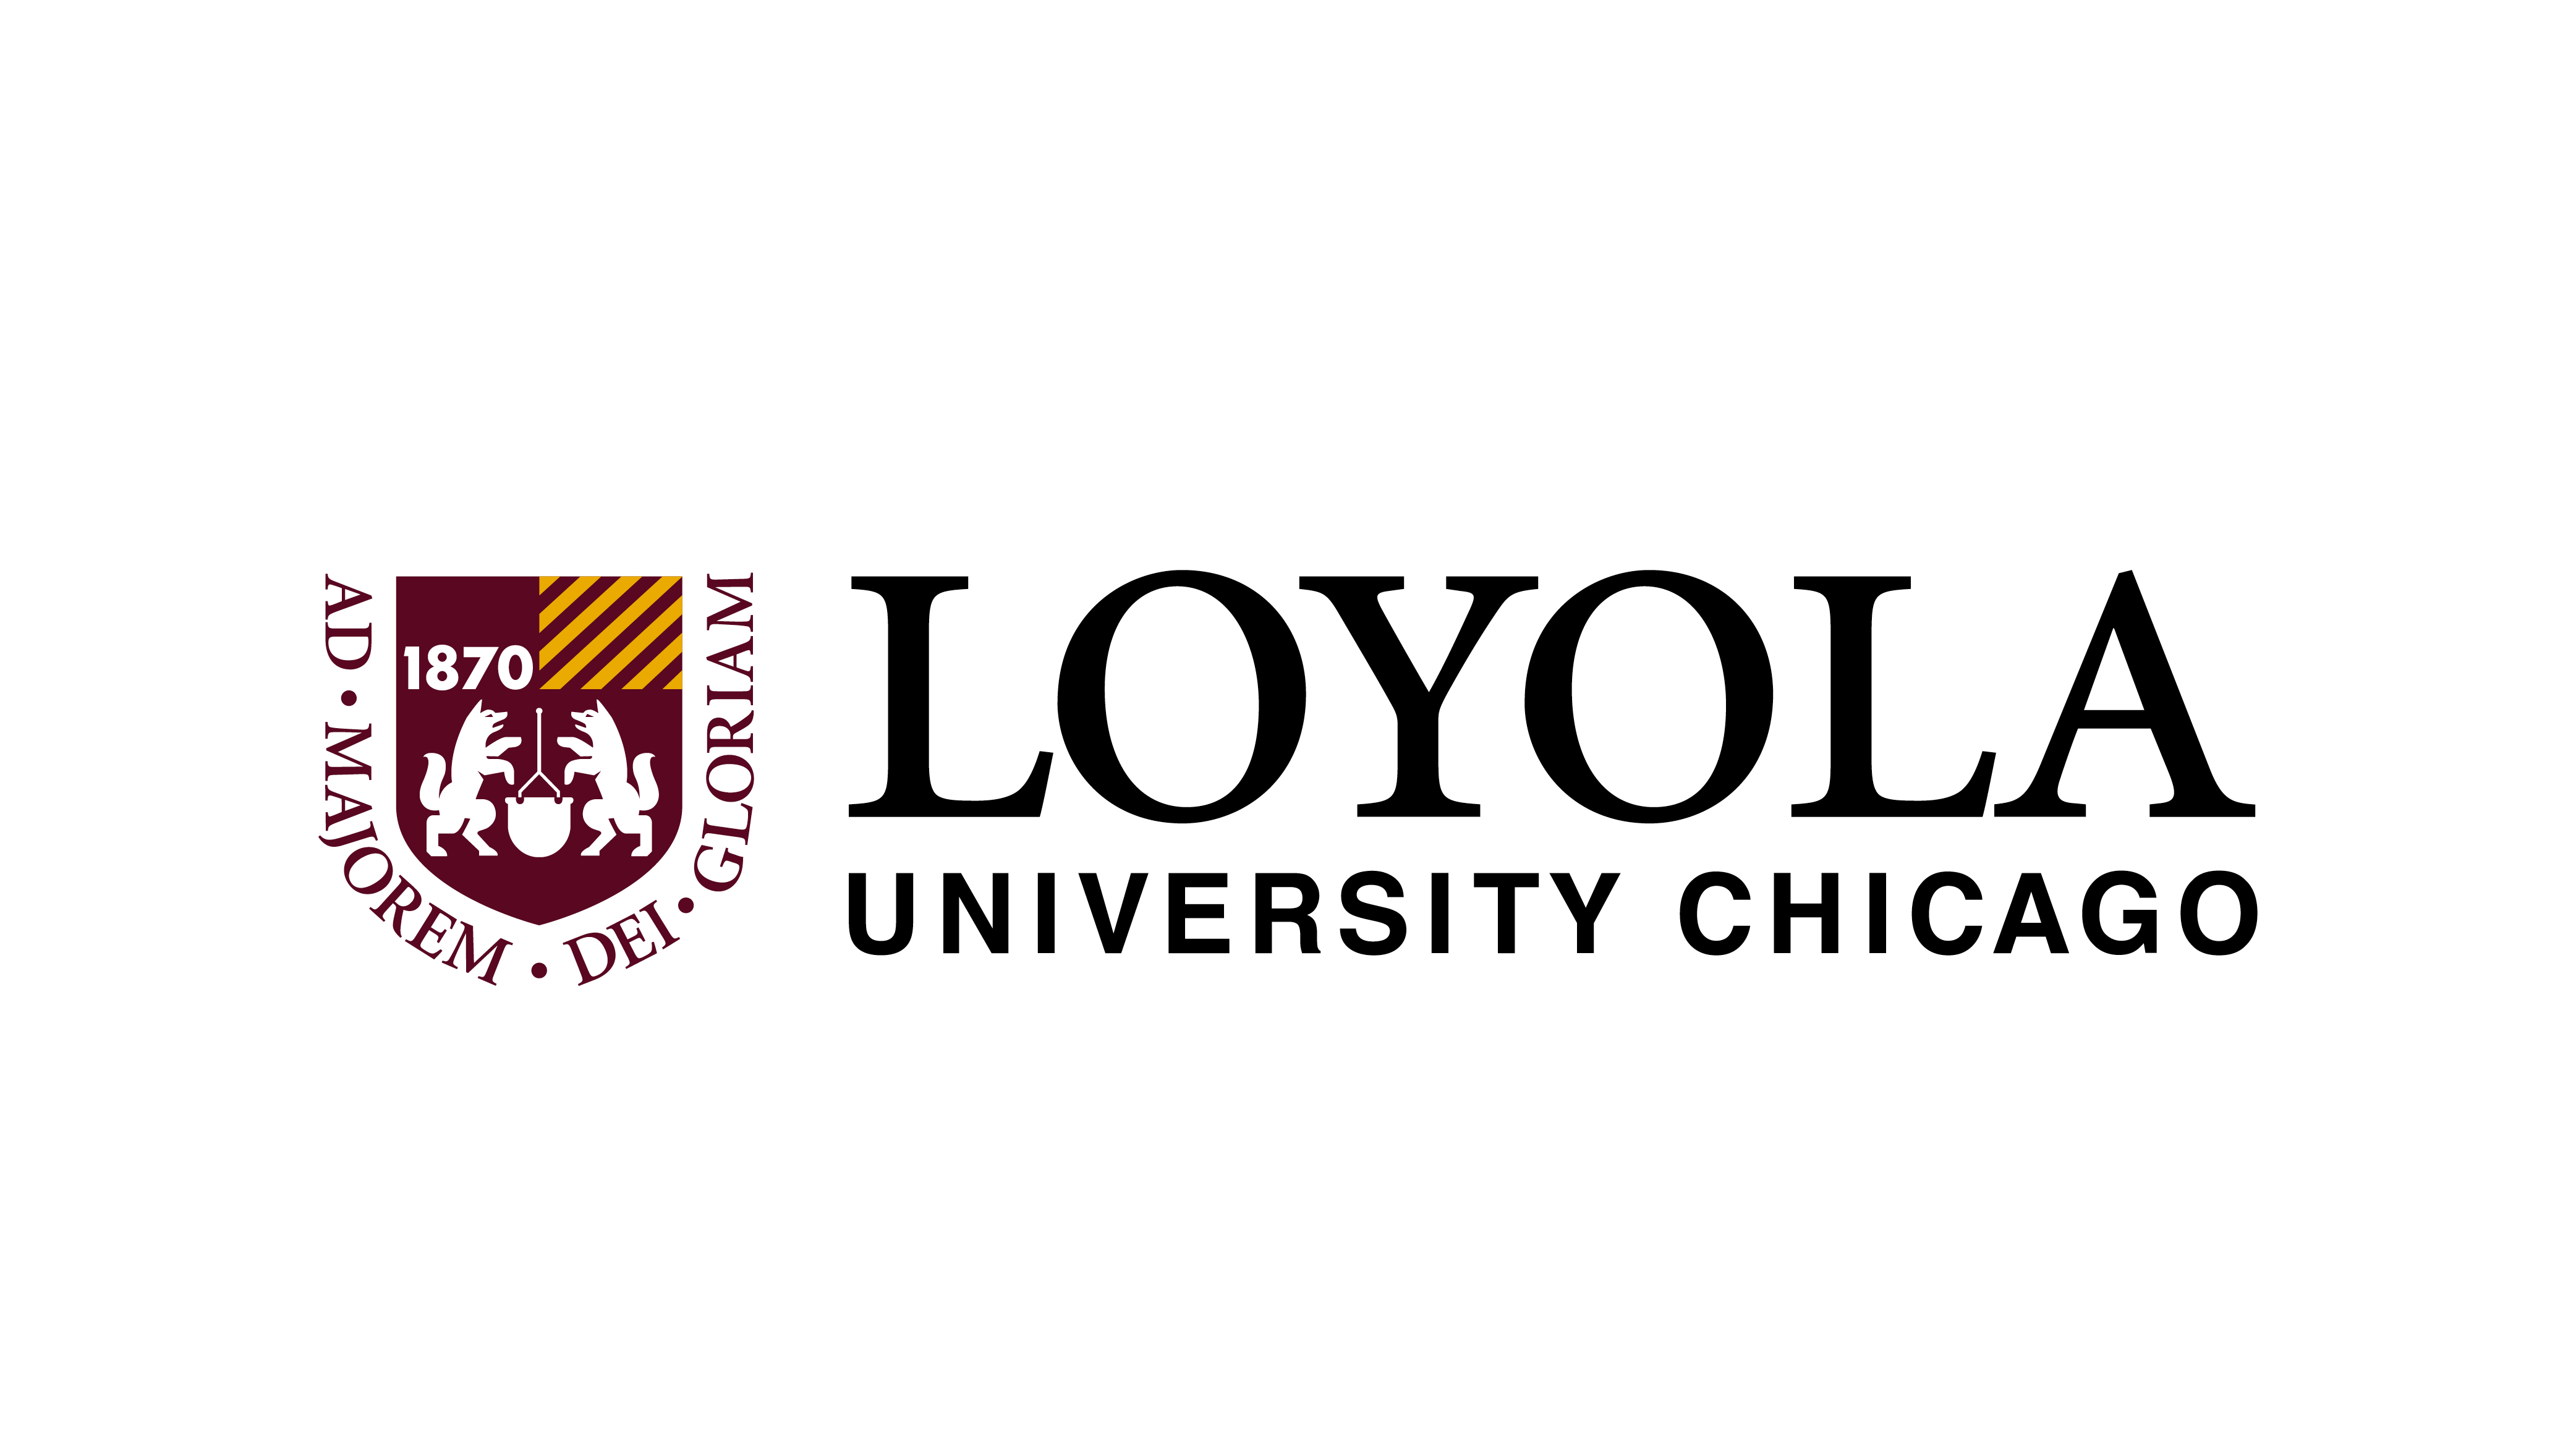 Color version of the official University of Loyola Chicago logo